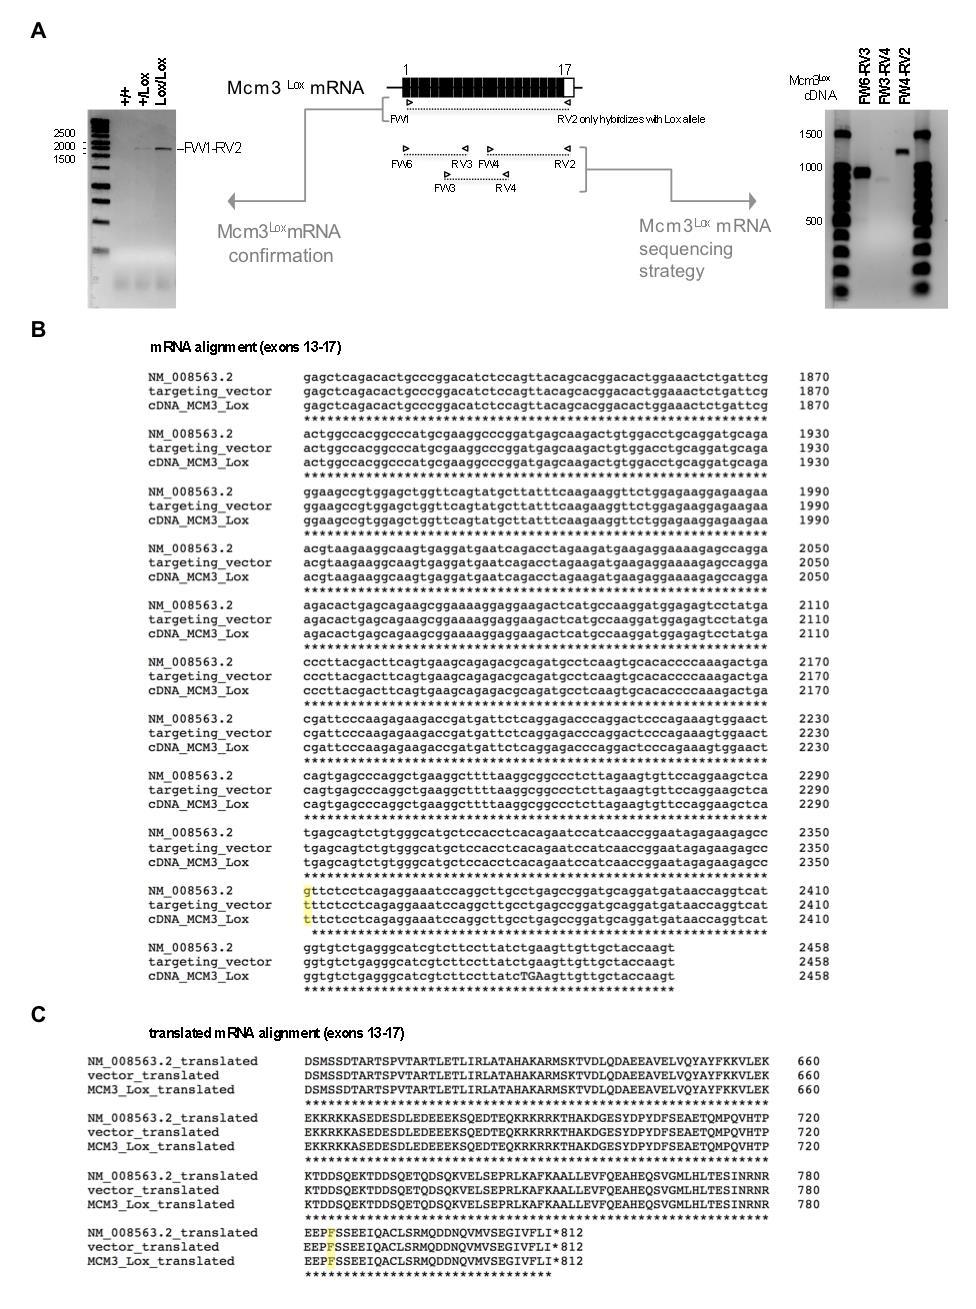 Supplementary Figure 2. Complete mrna sequencing of the Mcm3-Lox allele. A. Schematic representation of the Mcm3-Lox mrna.